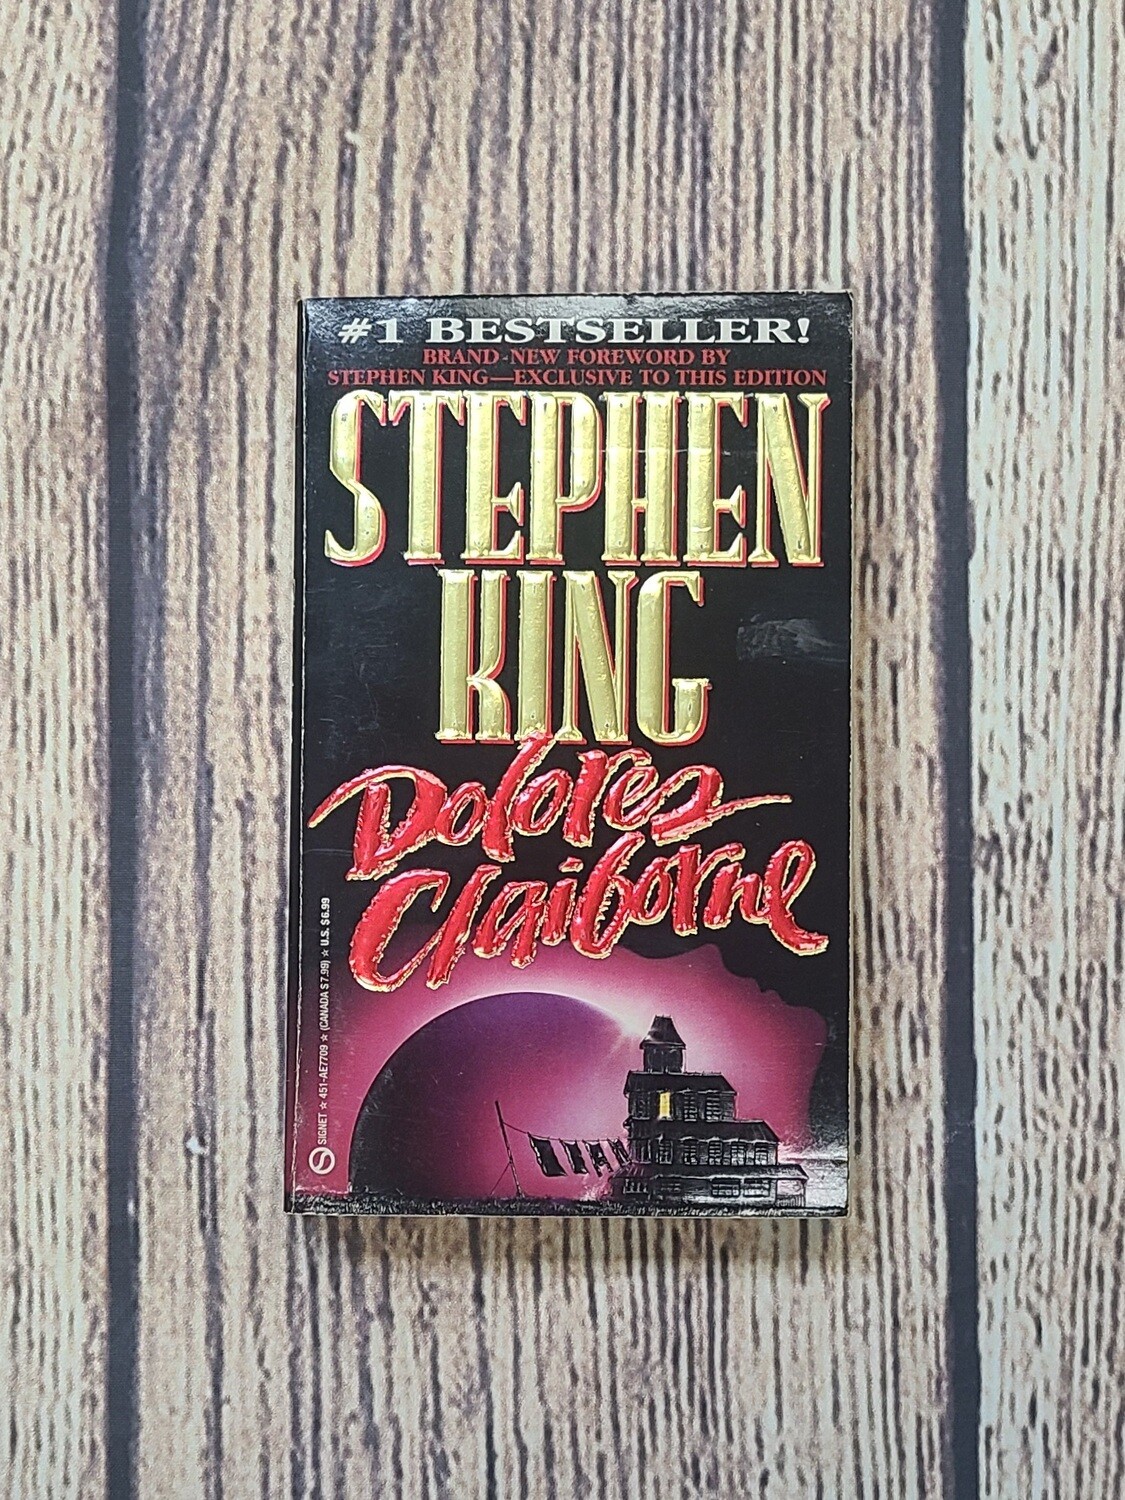 Dolores Claiborne by Stephen King - Paperback